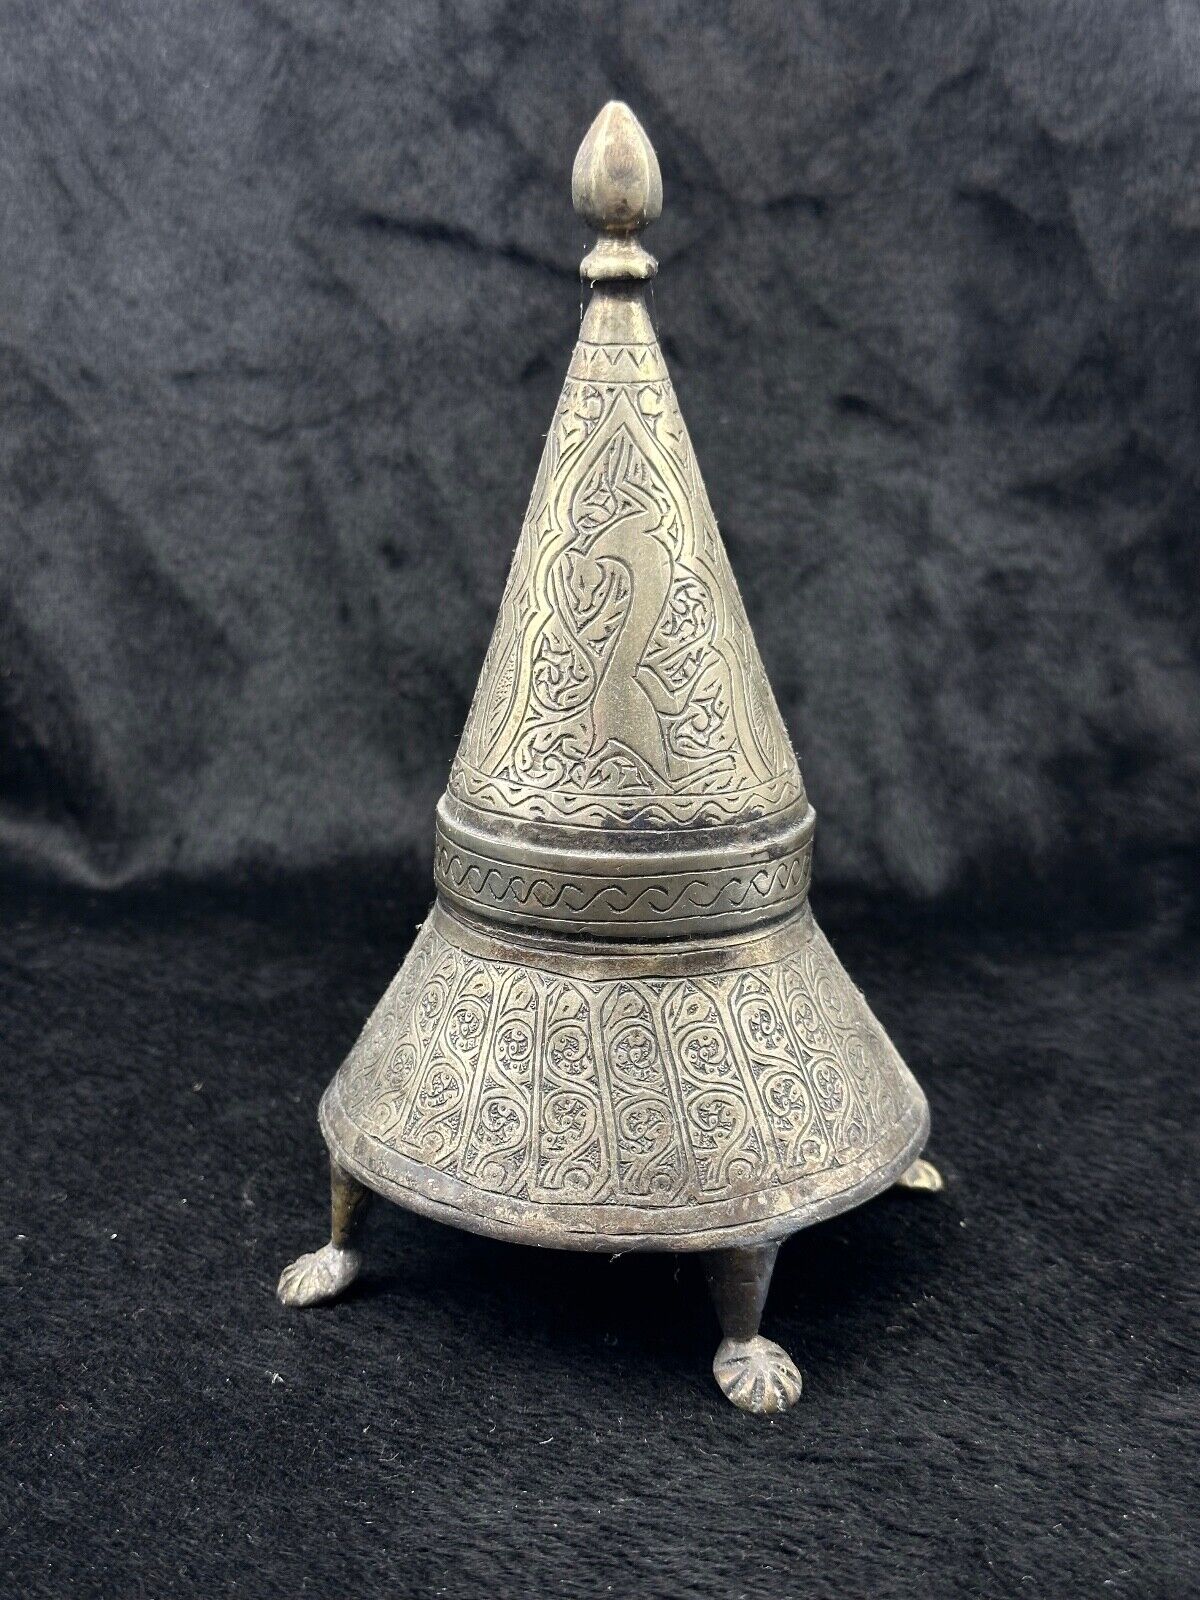 Vintage Beautiful Art Rare White Metal Handmade Old Box From Afghanistan